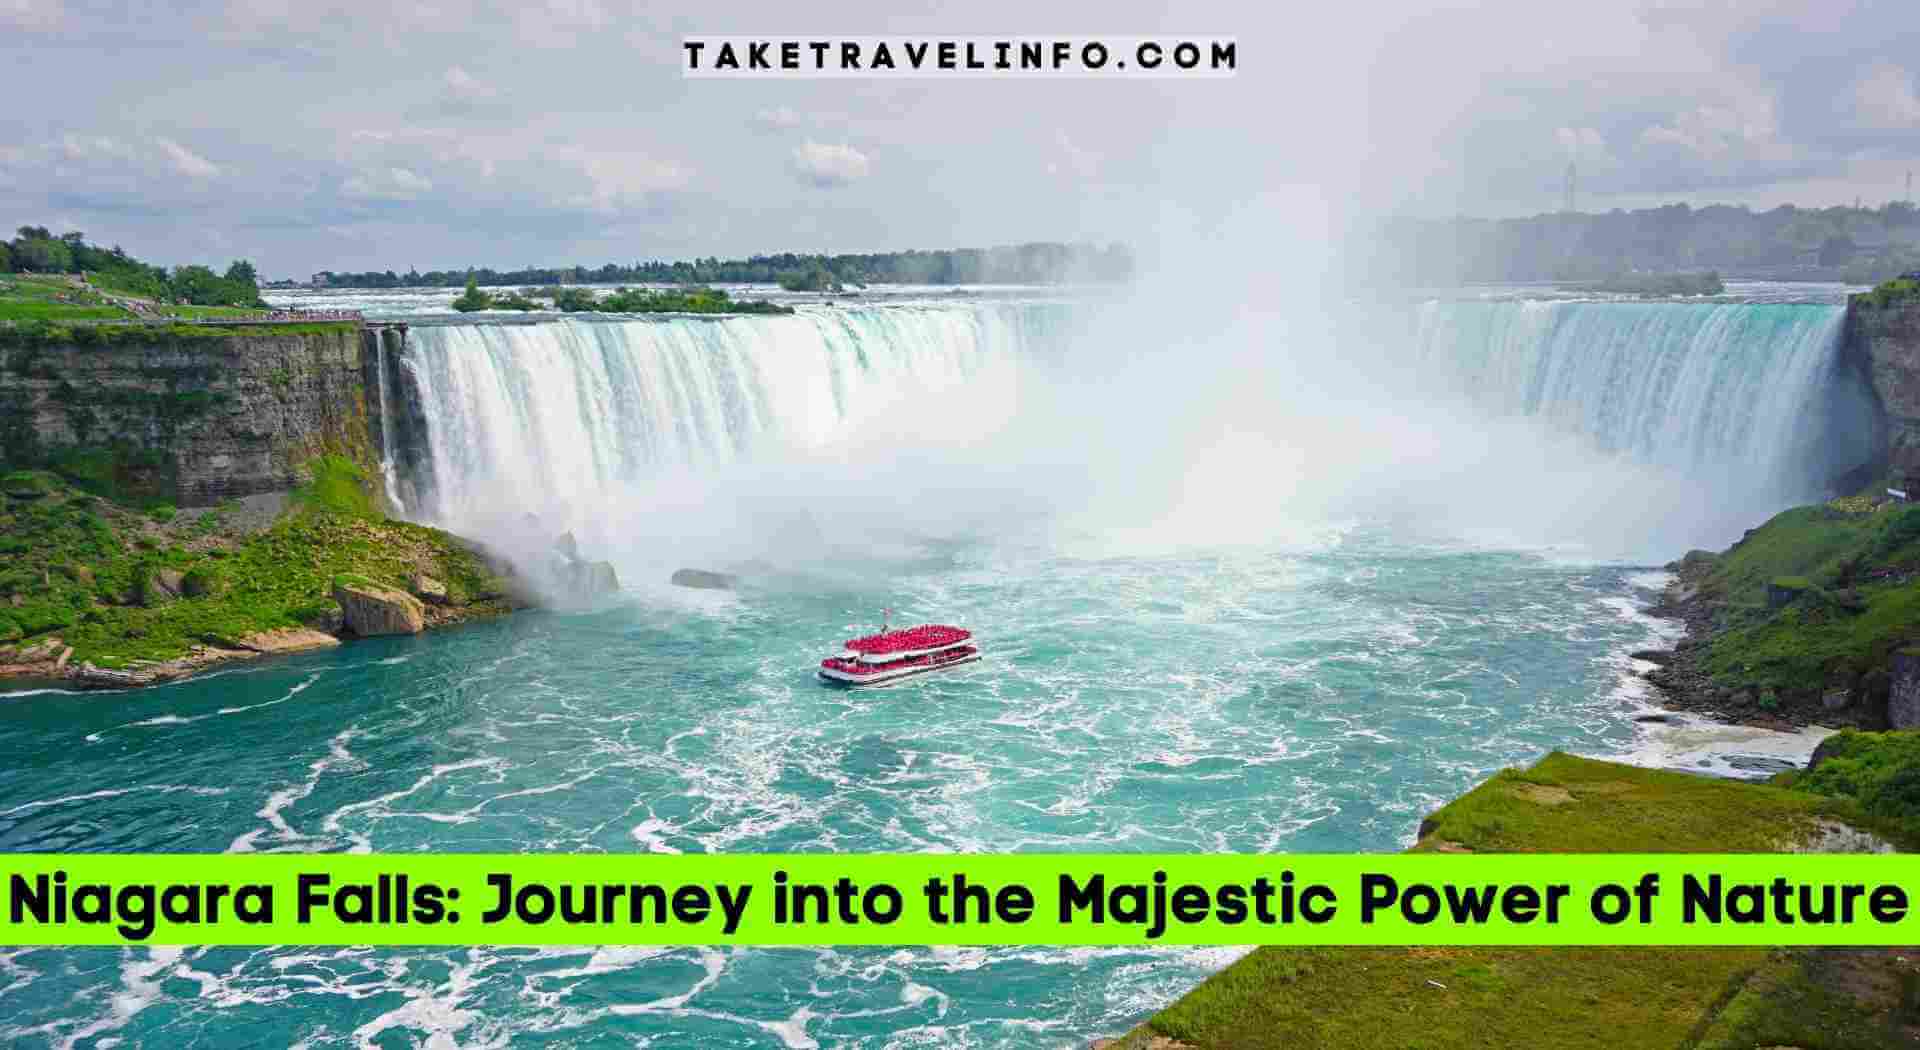 Niagara Falls: Journey into the Majestic Power of Nature